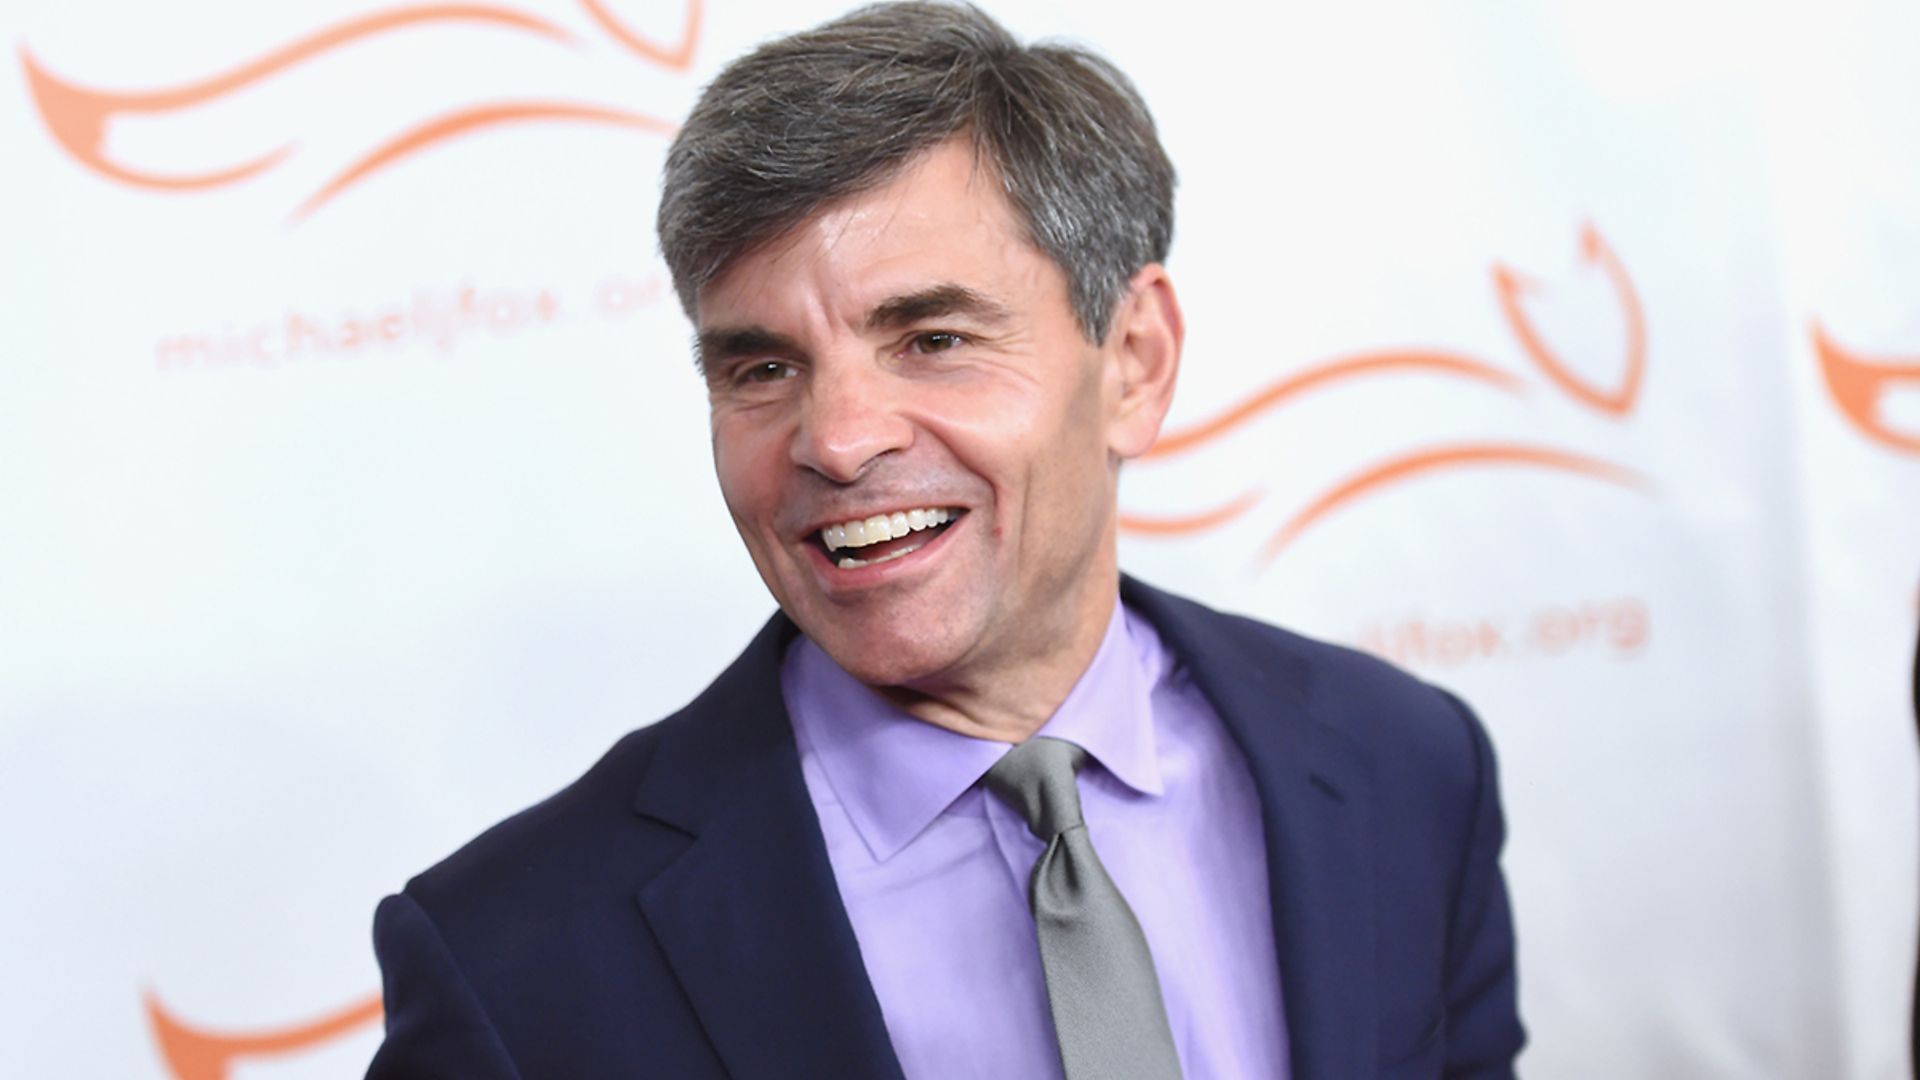 George Stephanopoulos unveils unusually casual appearance in cozy video as he announces big news